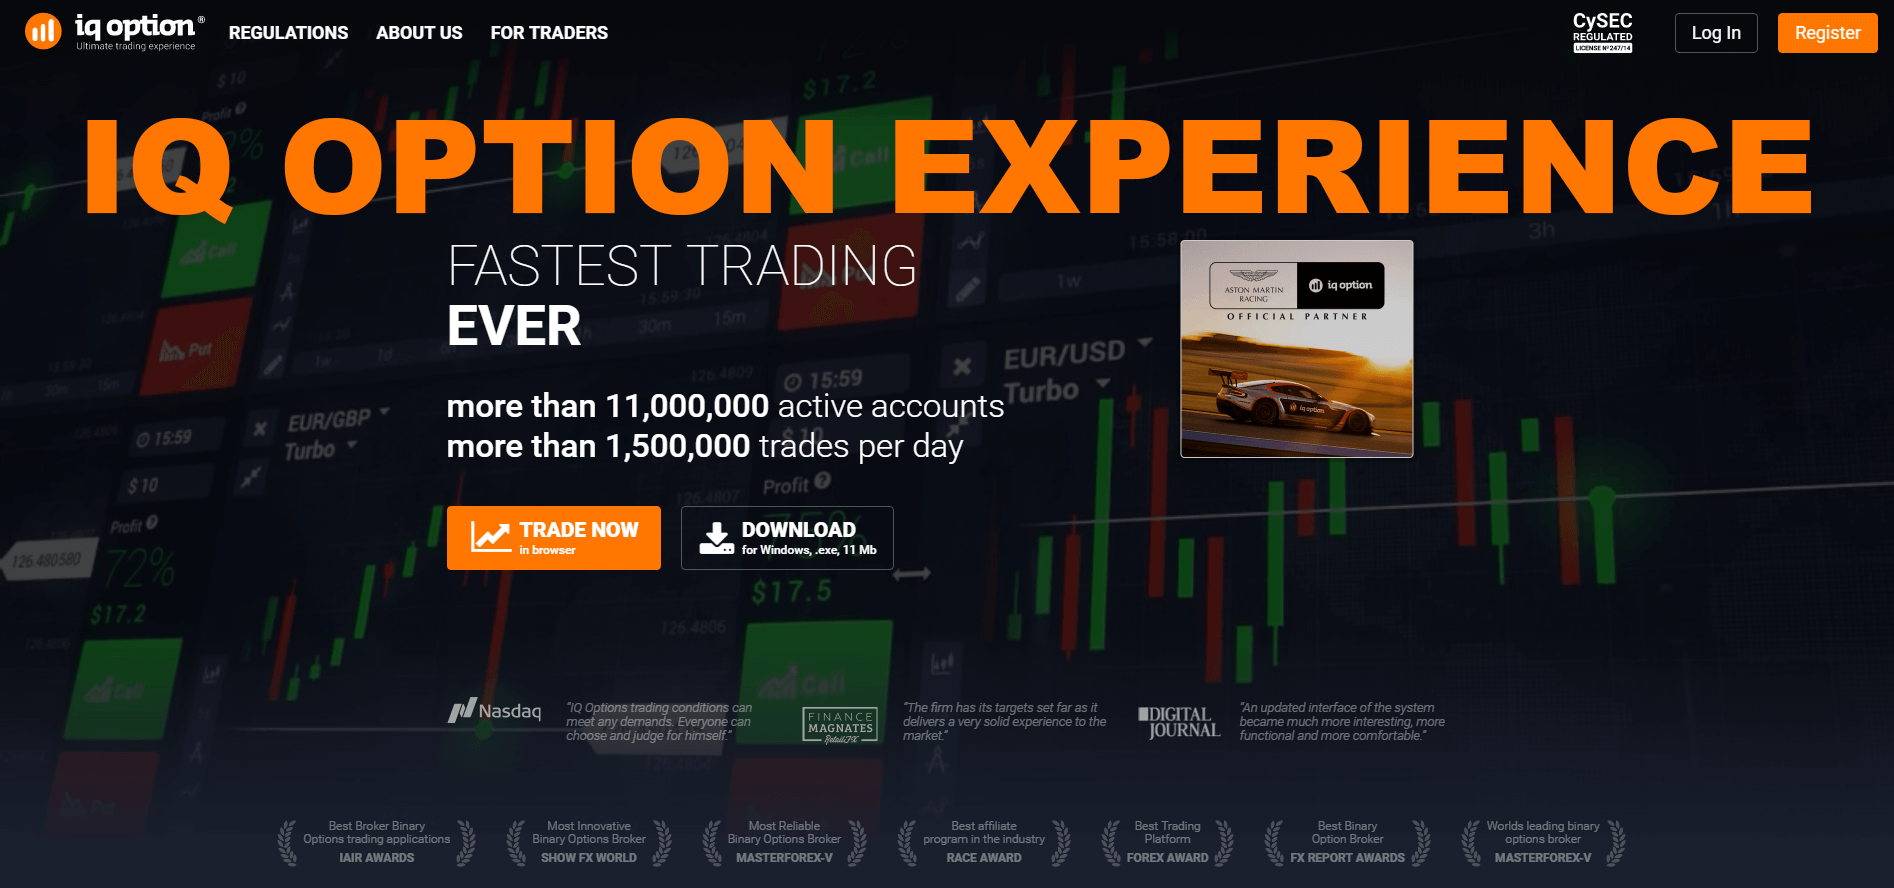 My experience with binary options